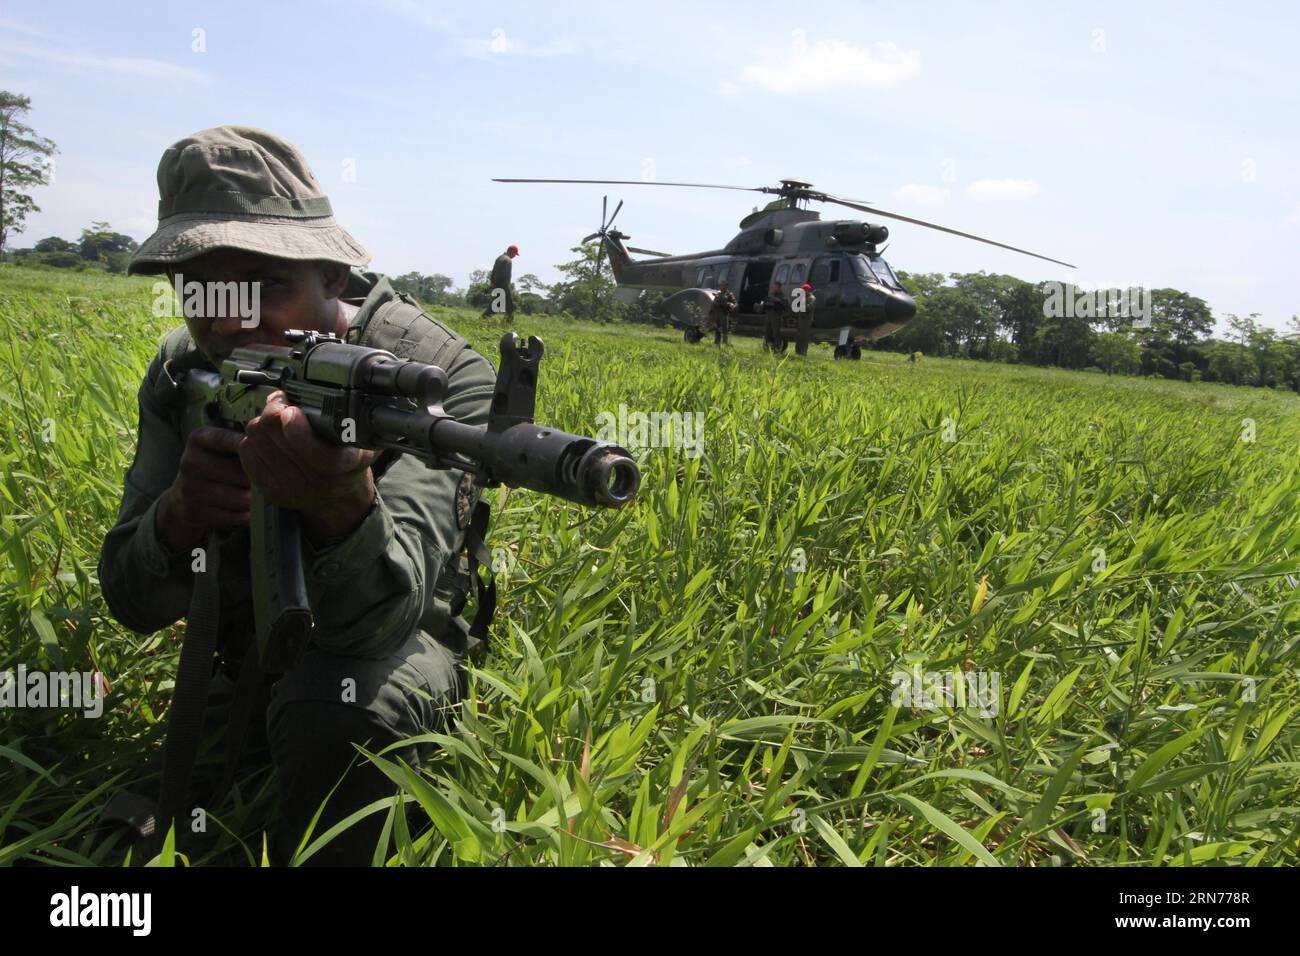 TACHIRA, Aug. 21, 2015 -- A soldier guards near the border between Venezuela and Colombia, in Boca de Grita, Tachira state, Venezuela, on Aug. 21, 2015. Venezuelan President, Nicolas Maduro, announced the extension of the closure of the border with Colombia through San Antonio del Tachira and the locality of Urena, 52km away of San Cristobal, capital of the state, until the two subjects that ambushed members of the Armed Force are captured. ) (da) VENEZUELA-TACHIRA-COLOMBIA-MILITARY-BORDER STR PUBLICATIONxNOTxINxCHN   Tachira Aug 21 2015 a Soldier Guards Near The Border between Venezuela and C Stock Photo